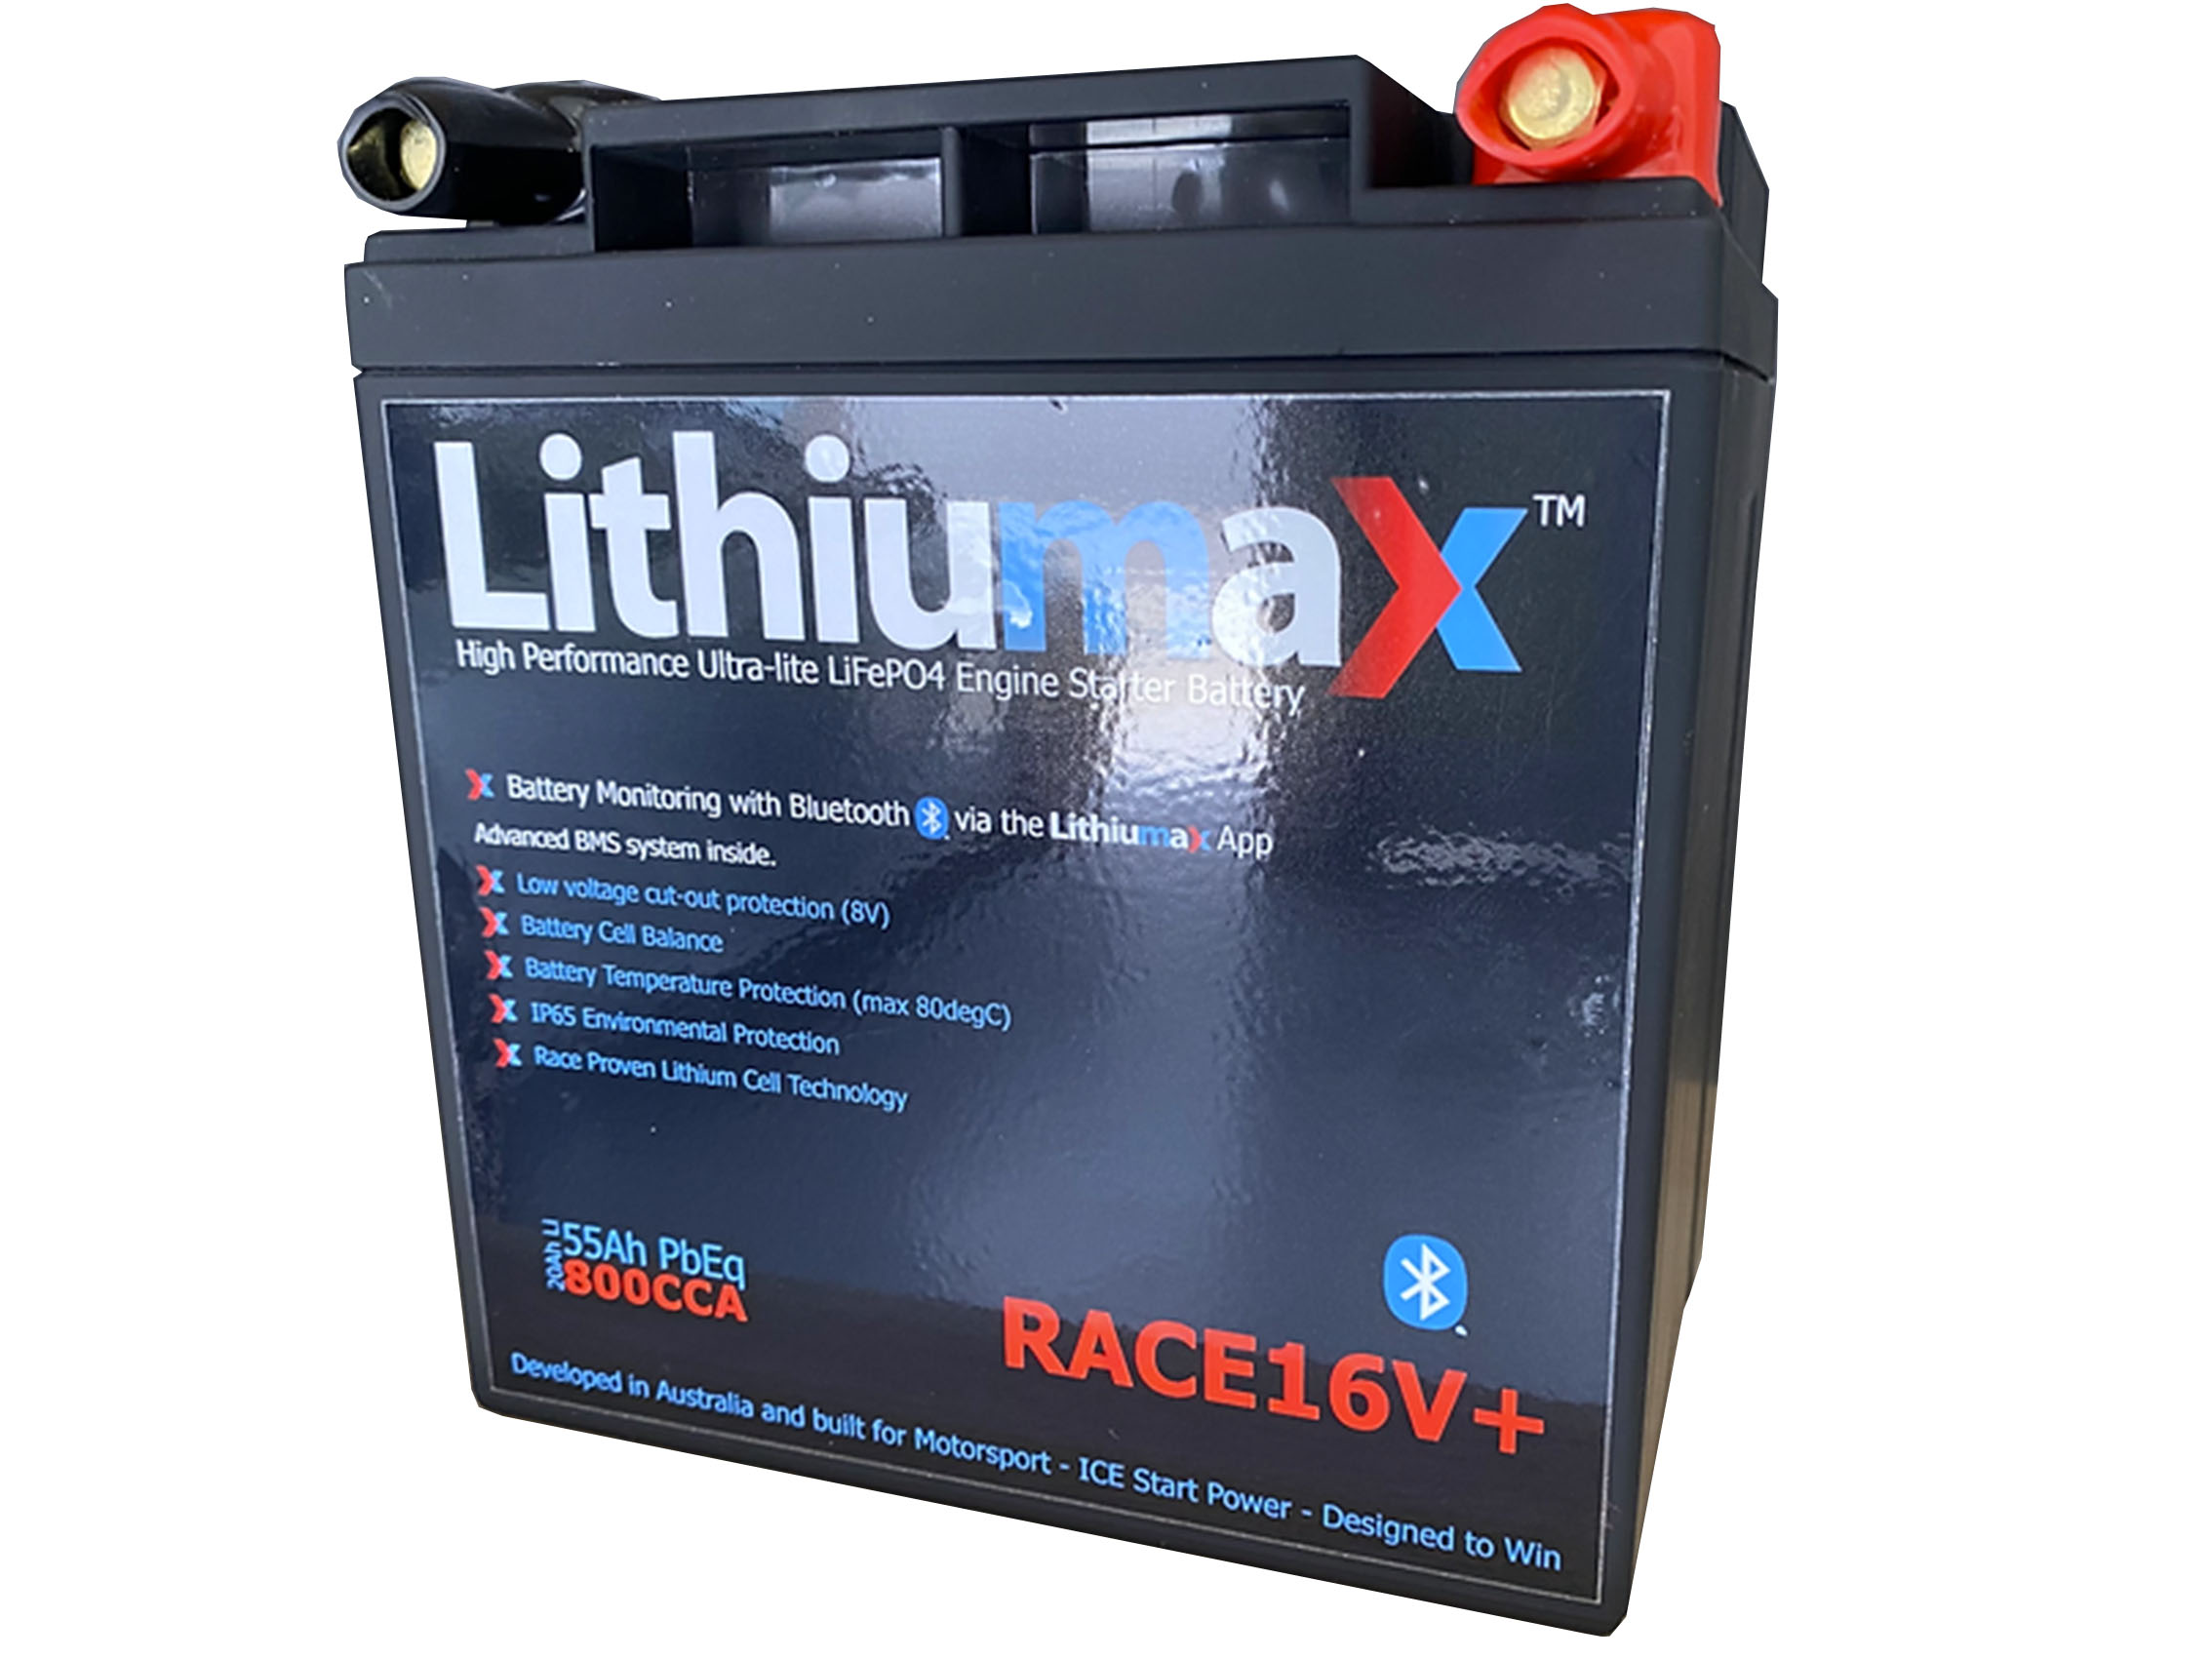 T1600 16V 20Ah Lithium Ion Racing Battery